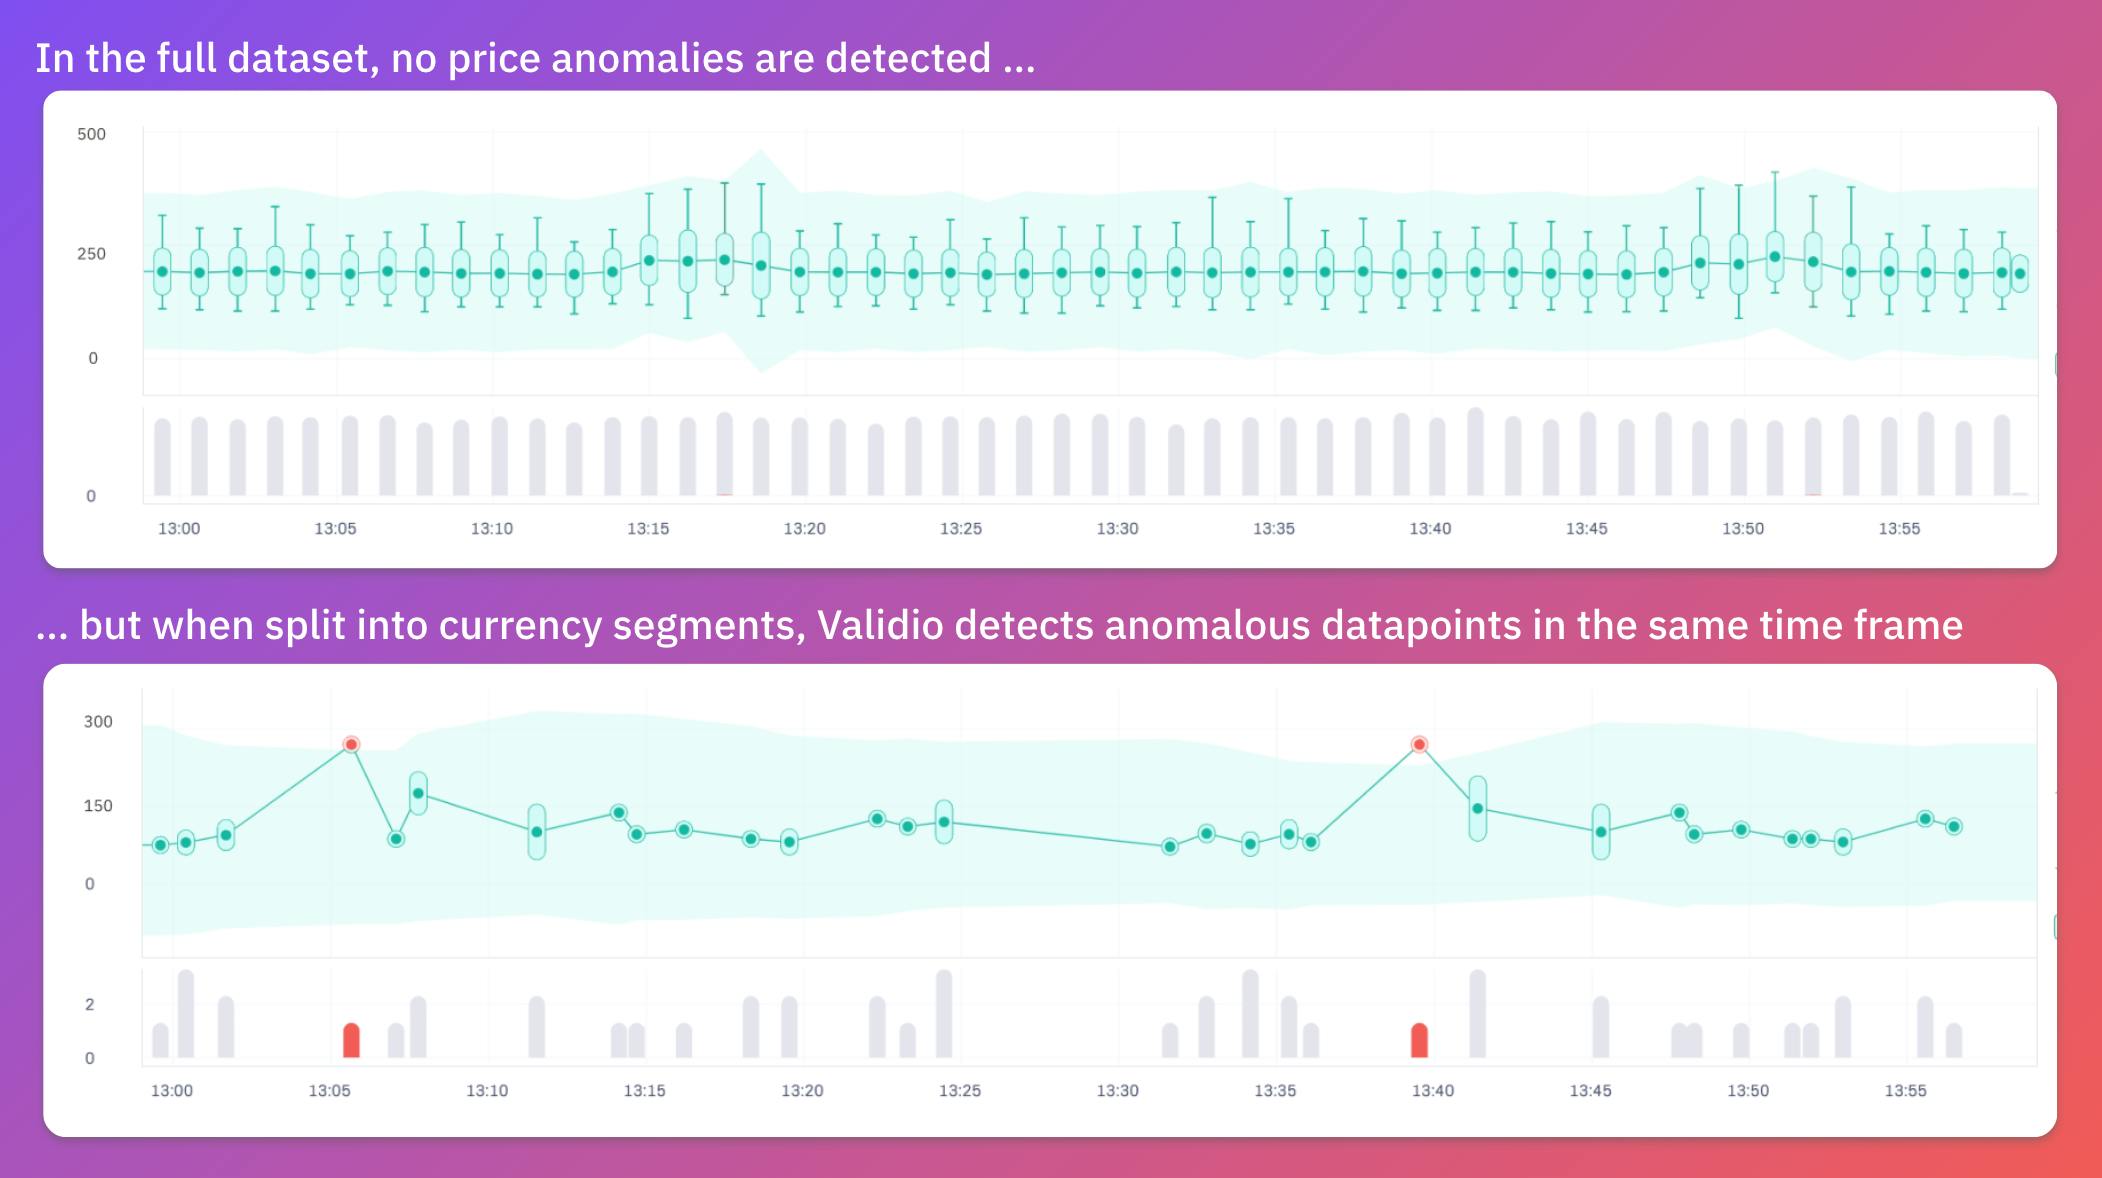 By splitting price into currency segments, Validio detects two anomalies in the DKK segment while the same datapoints are considered normal range values in the complete set. Ruby investigates the datapoints and discovers they were attributed incorrect currencies.